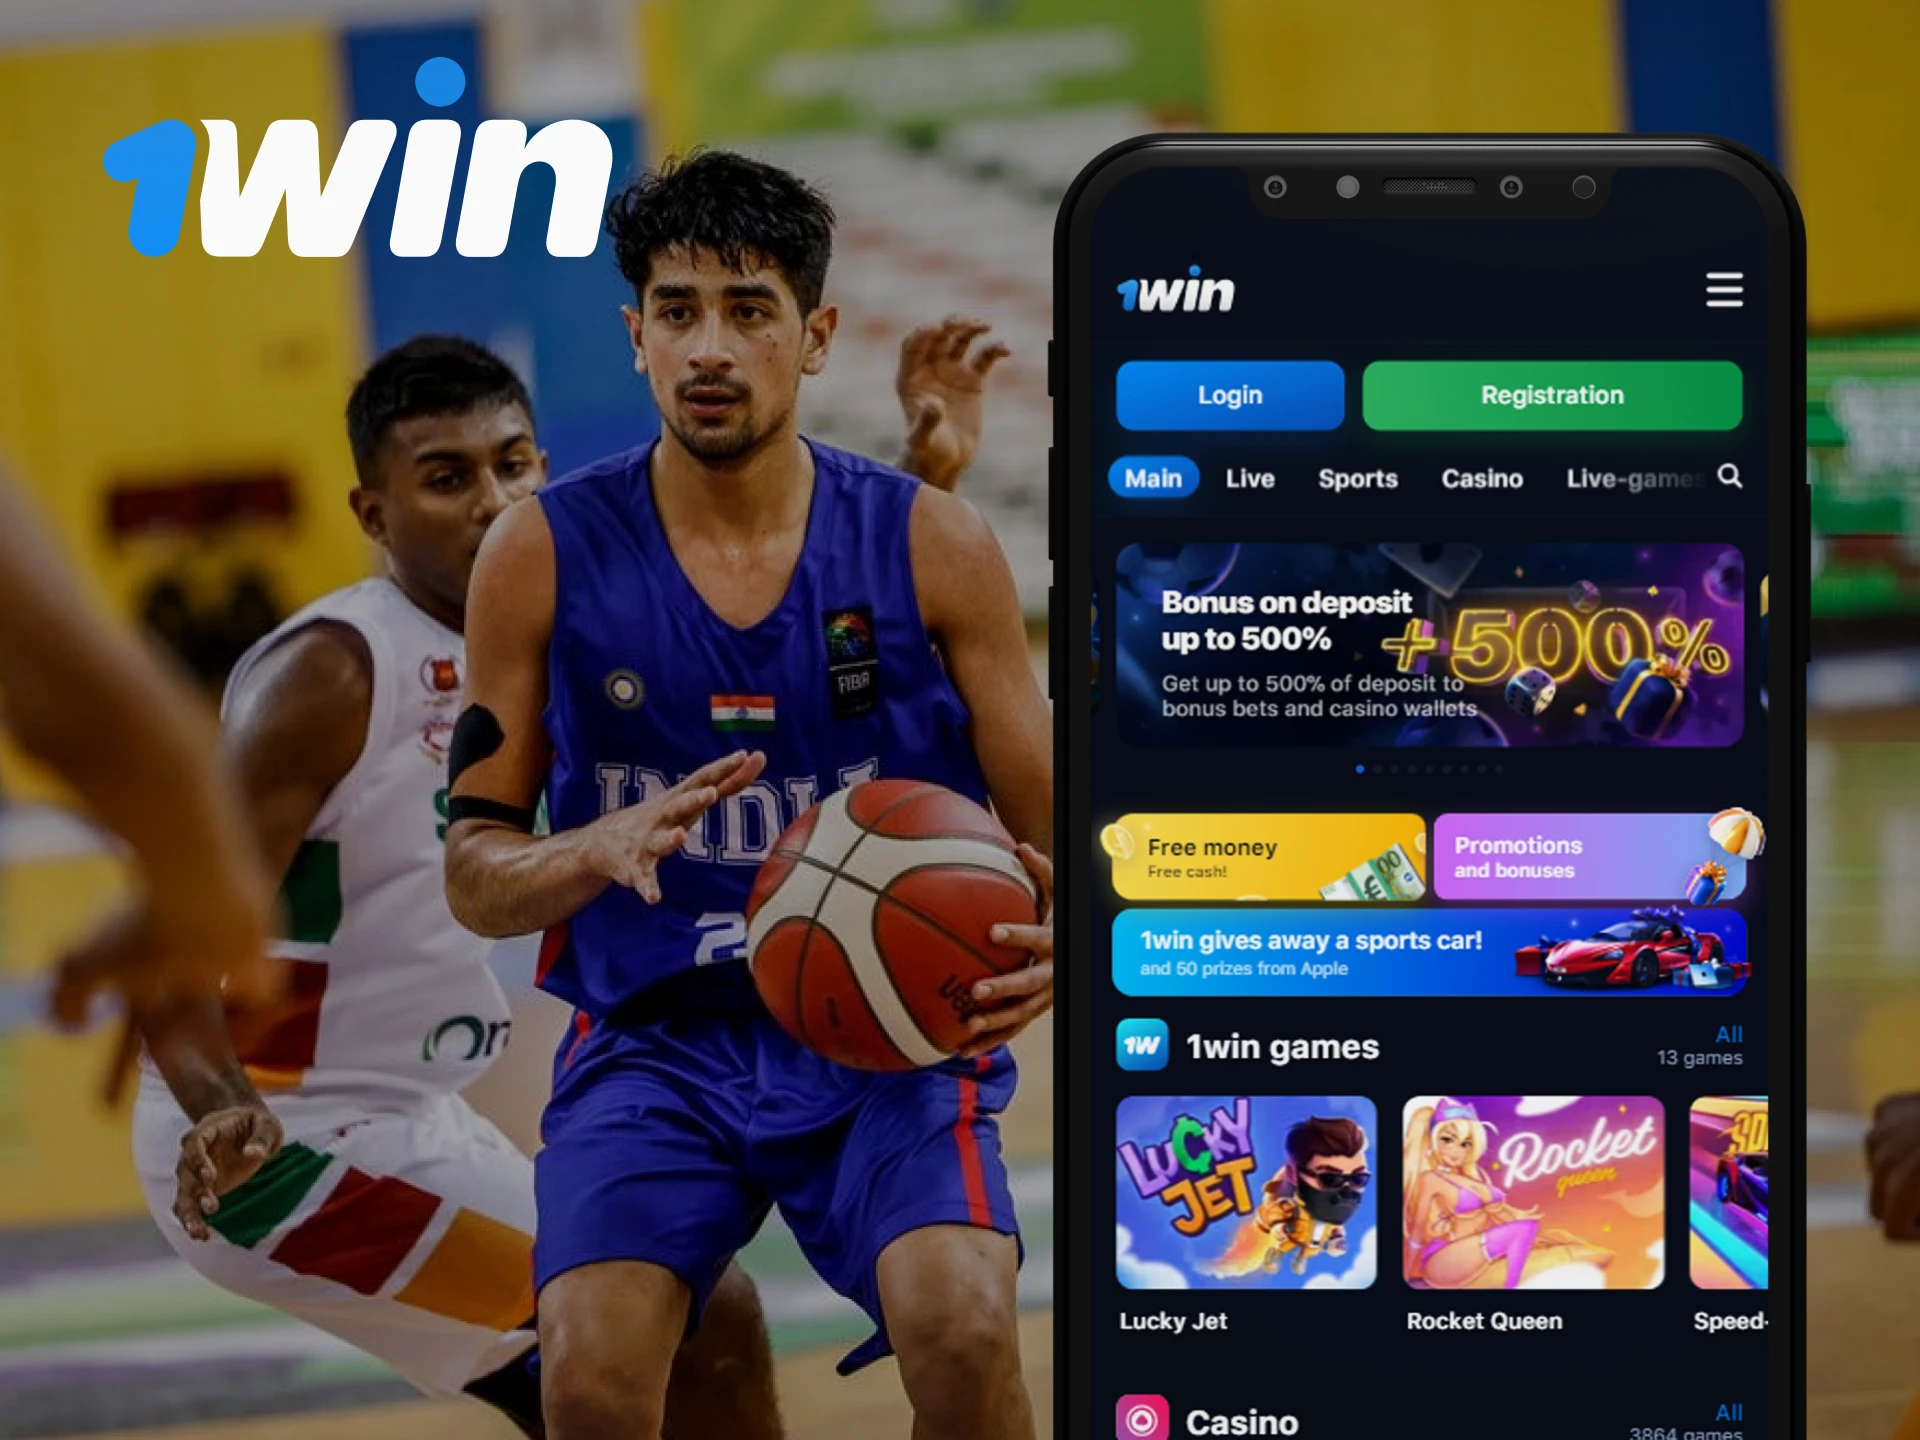 The 1win app is one of the most popular sports betting apps.